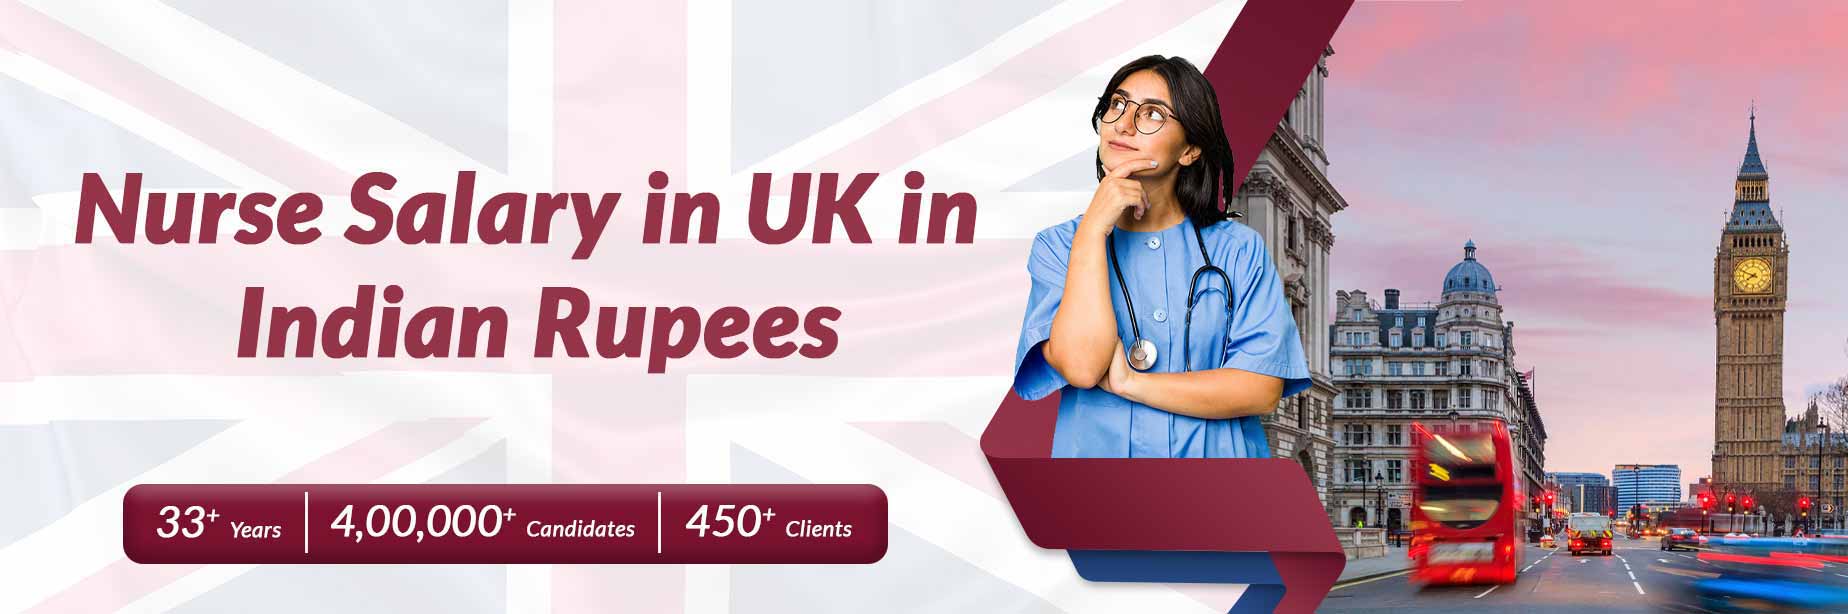 Nurse Salary in UK in Indian Rupees